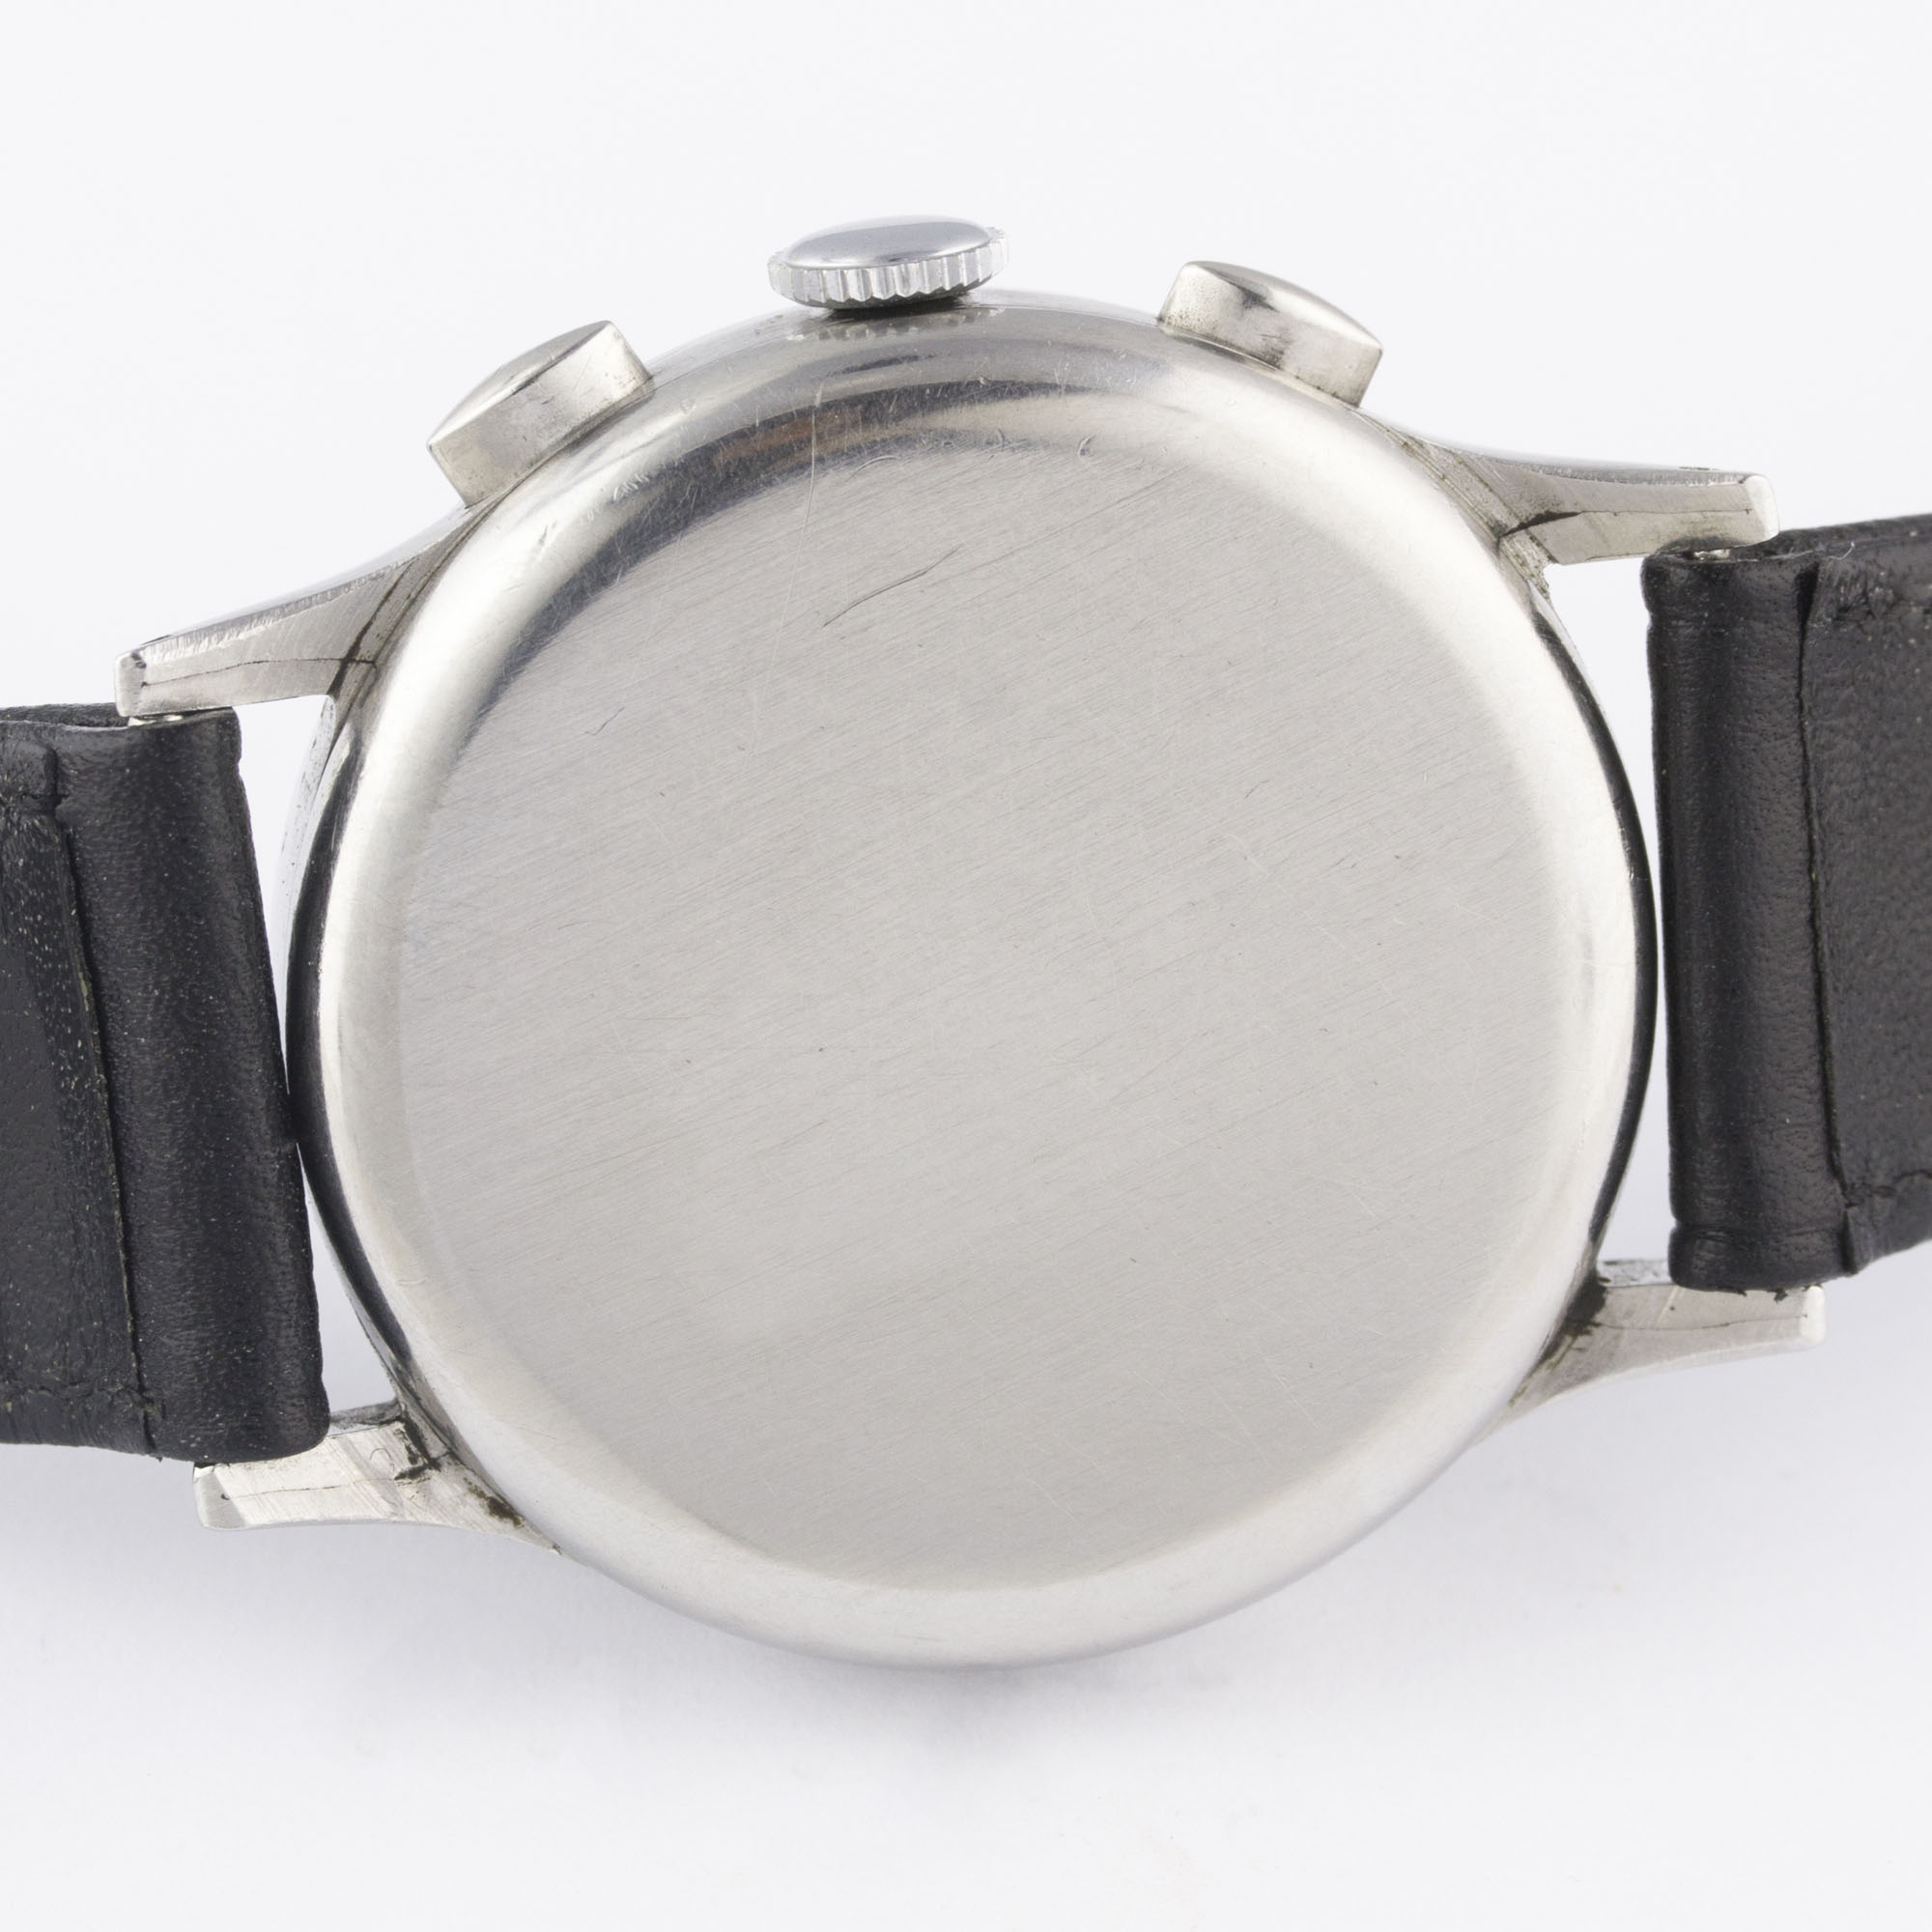 A RARE GENTLEMAN'S LARGE SIZE STAINLESS STEEL DOXA CHRONOGRAPH WRIST WATCH CIRCA 1940s, WITH GLOSS - Image 7 of 11